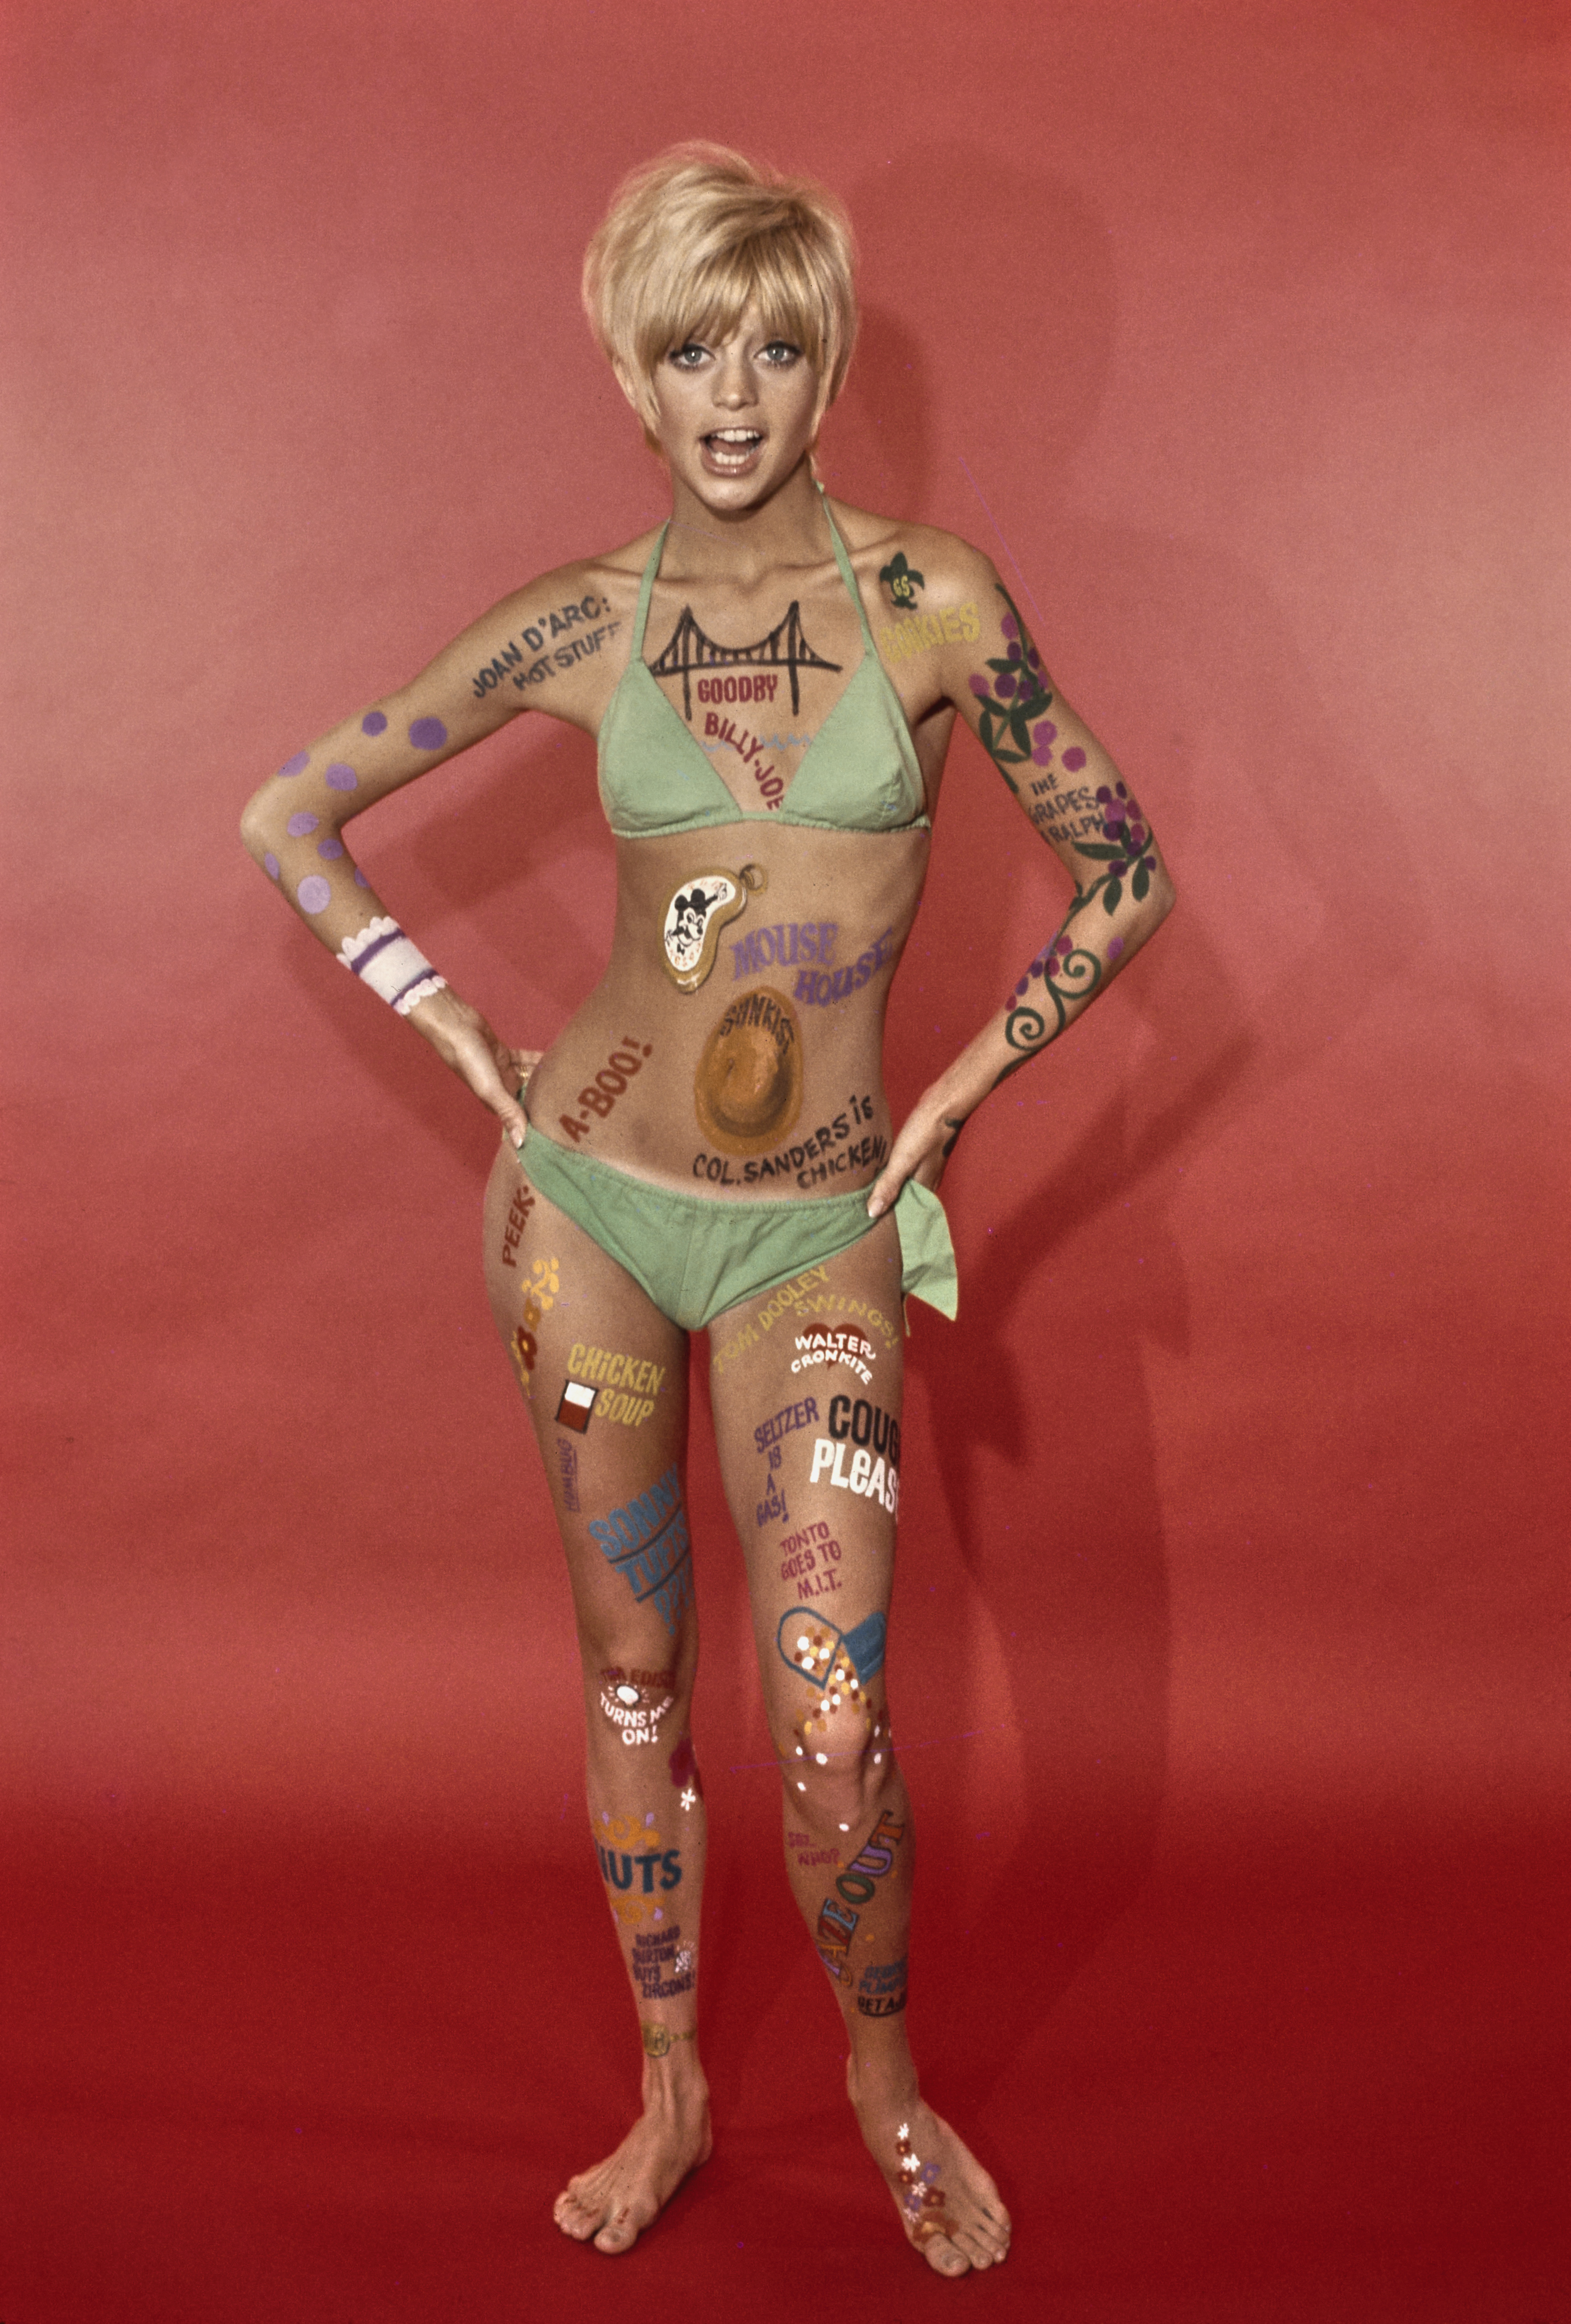 Goldie Hawn wears body paint and a bikini in a promotional portrait for the television series, 'Laugh-In', on June 30, 1968. | Source: Getty Images